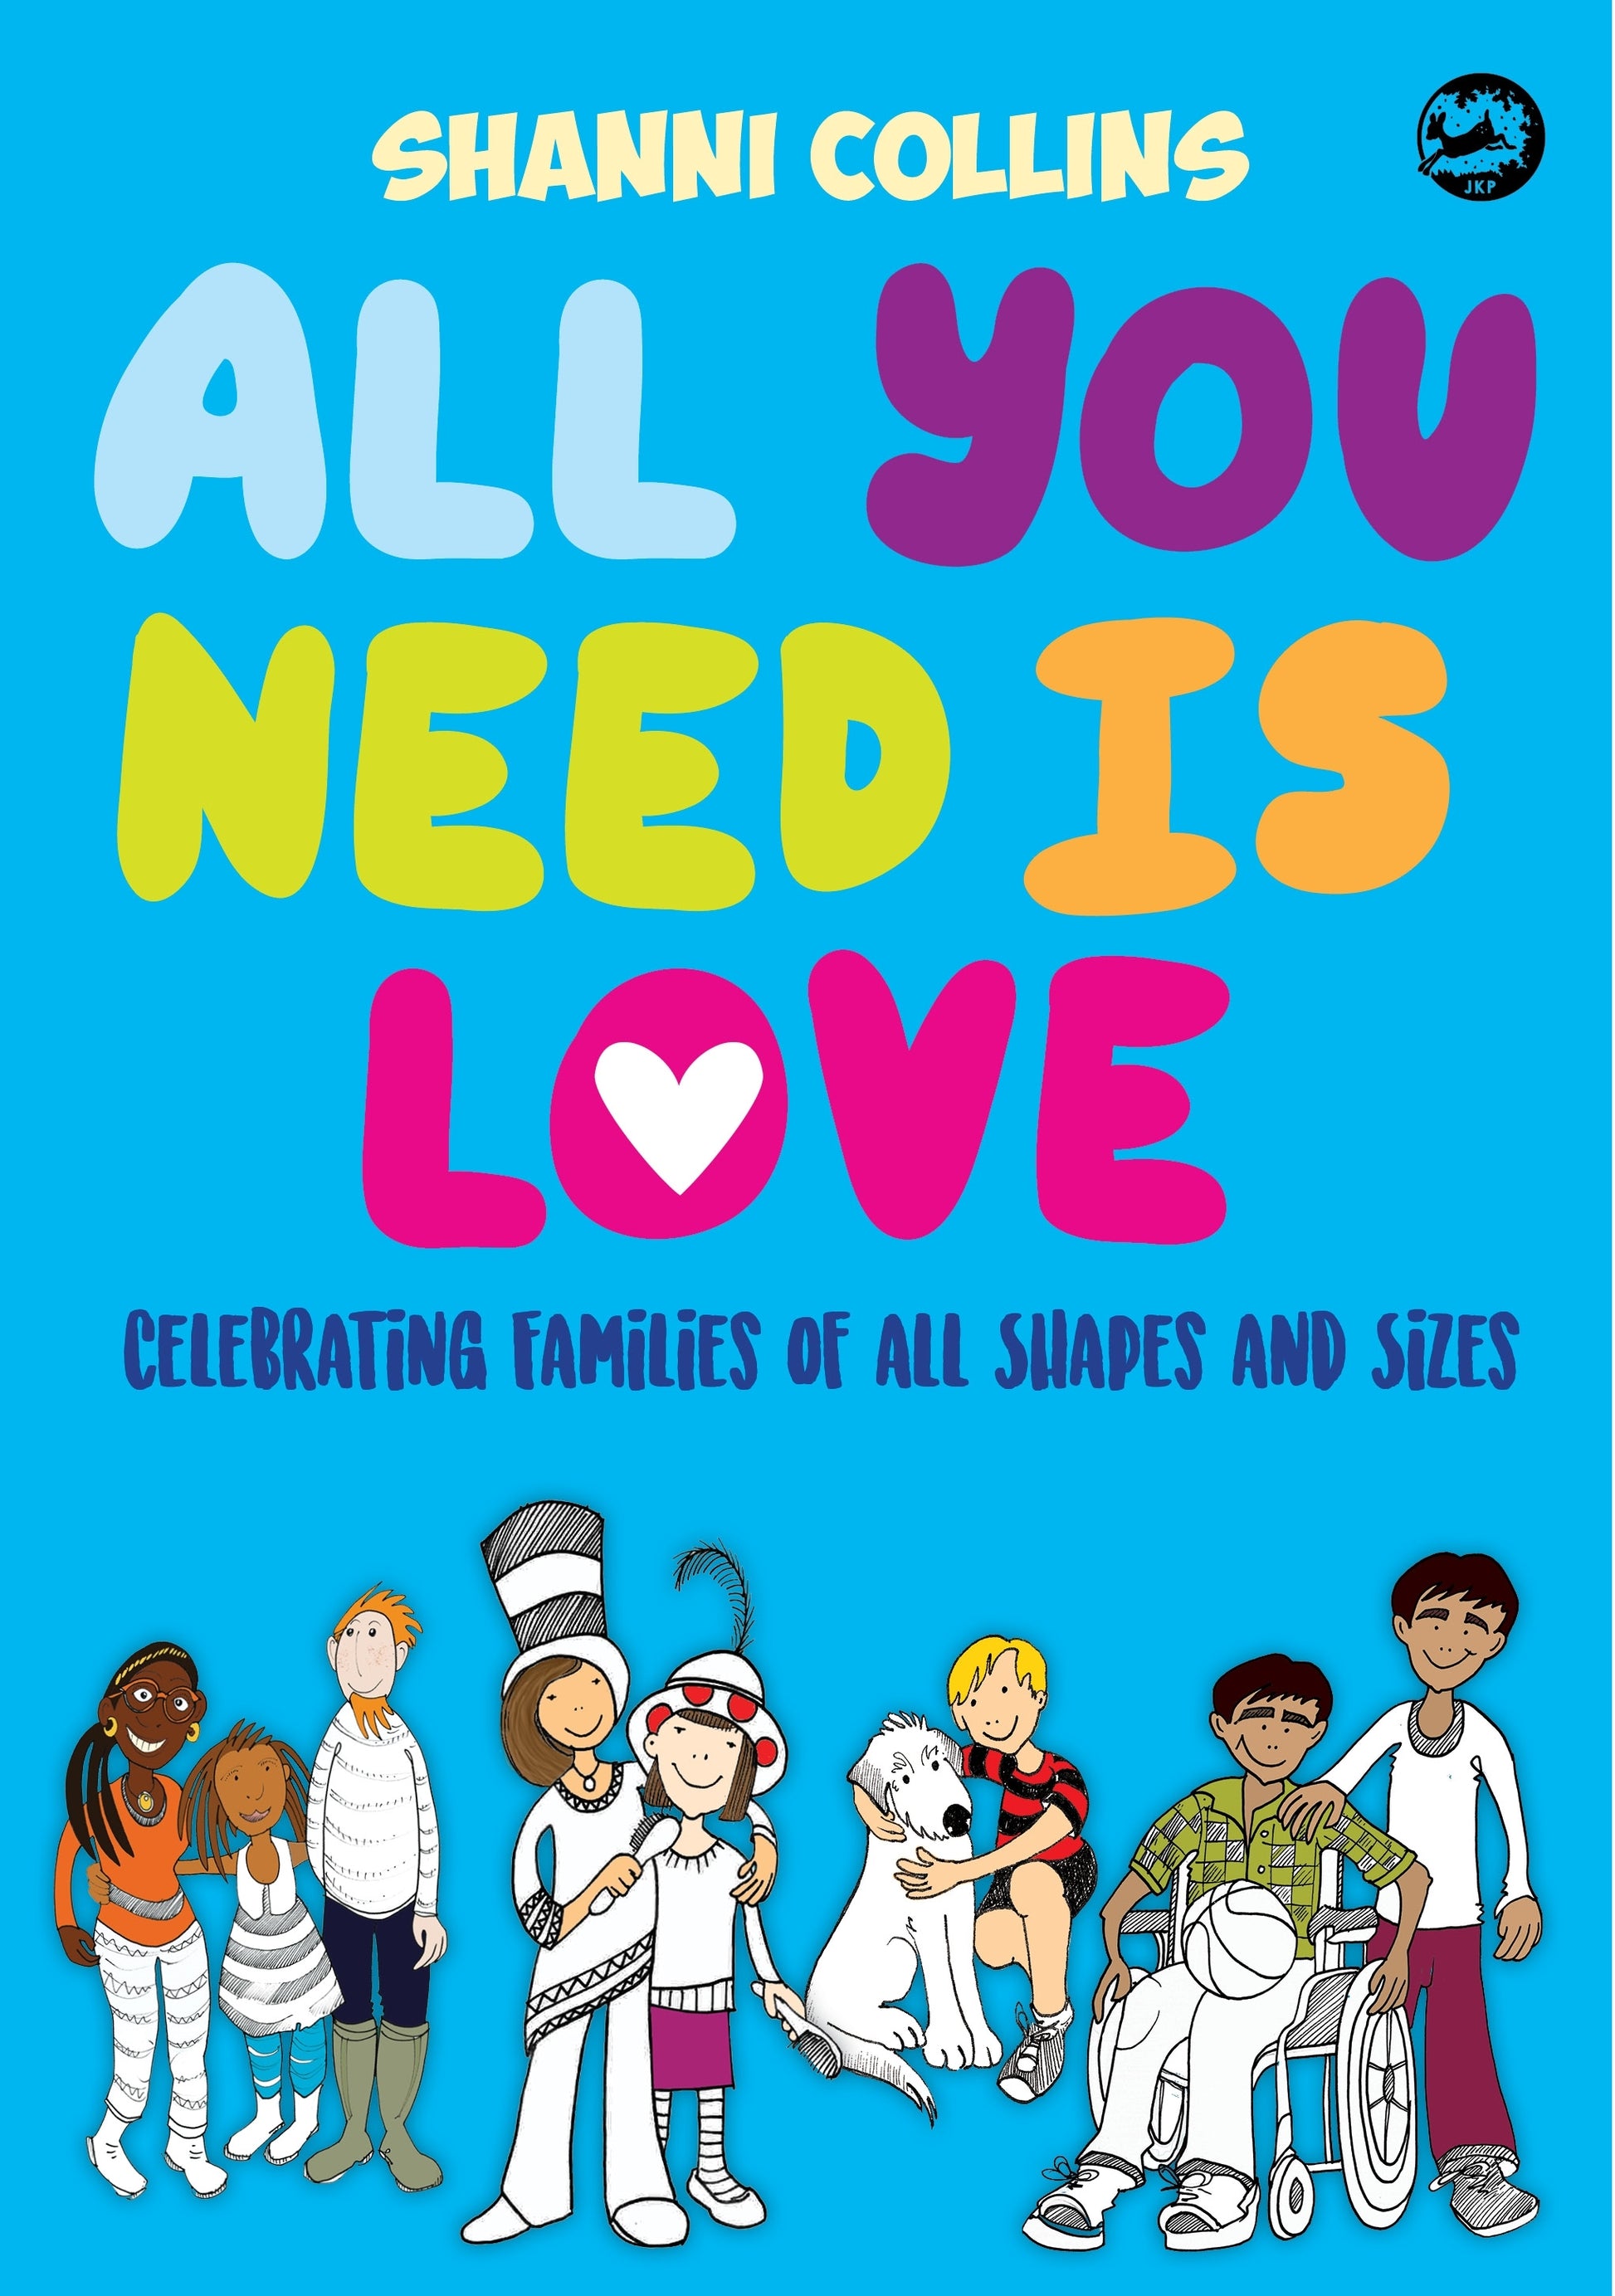 All You Need Is Love by Shanni Collins